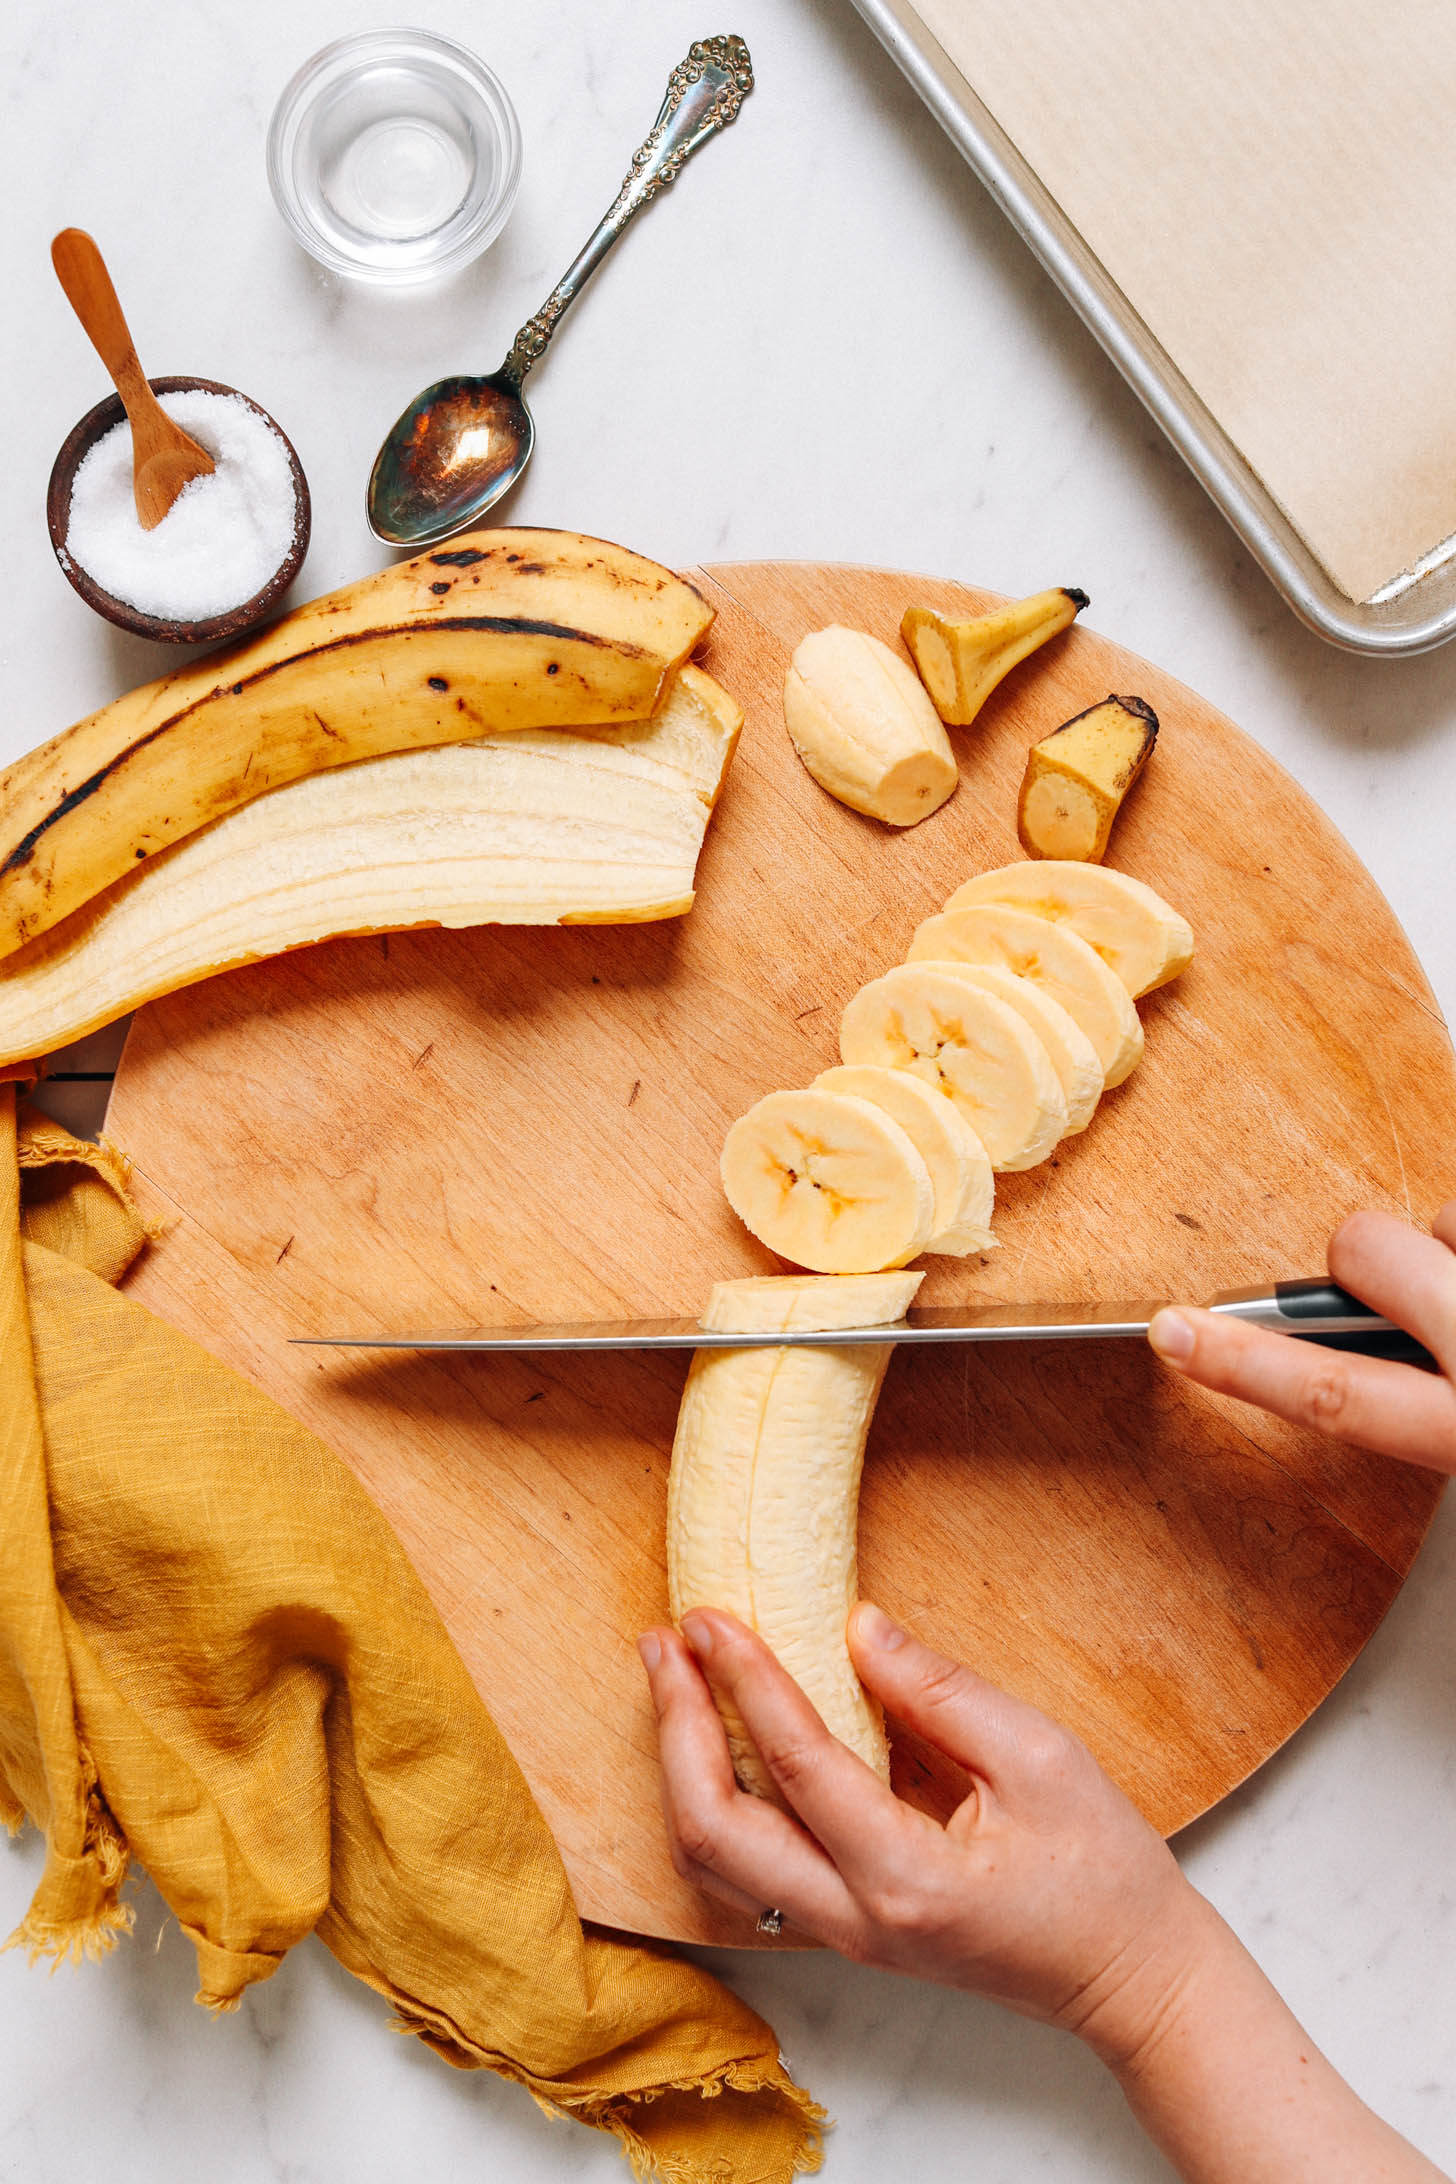 Showing how to slice plantain at an angle